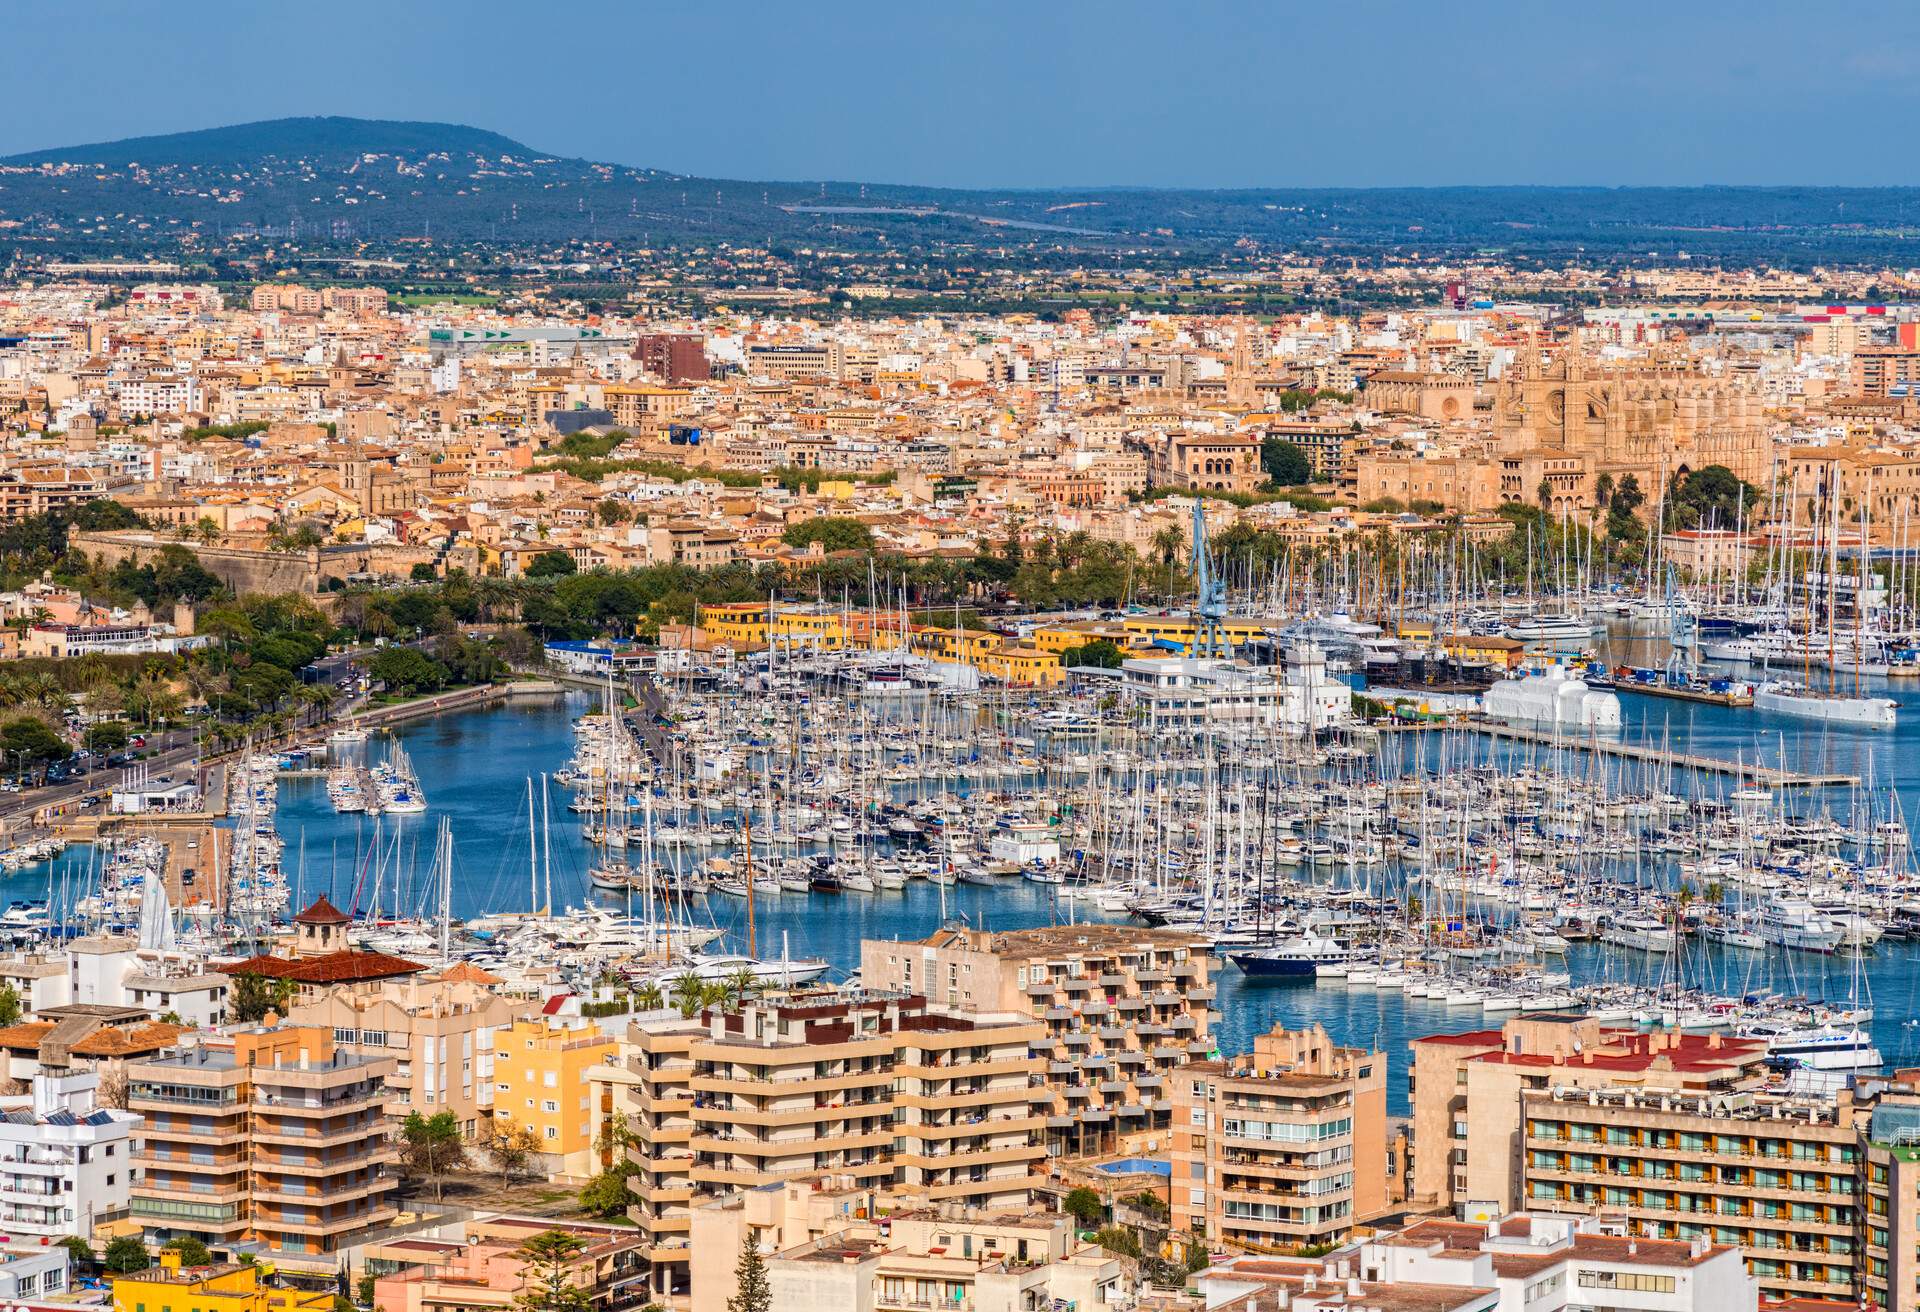 yacht harbor and view to the city of Palma de Mallorca - Spain